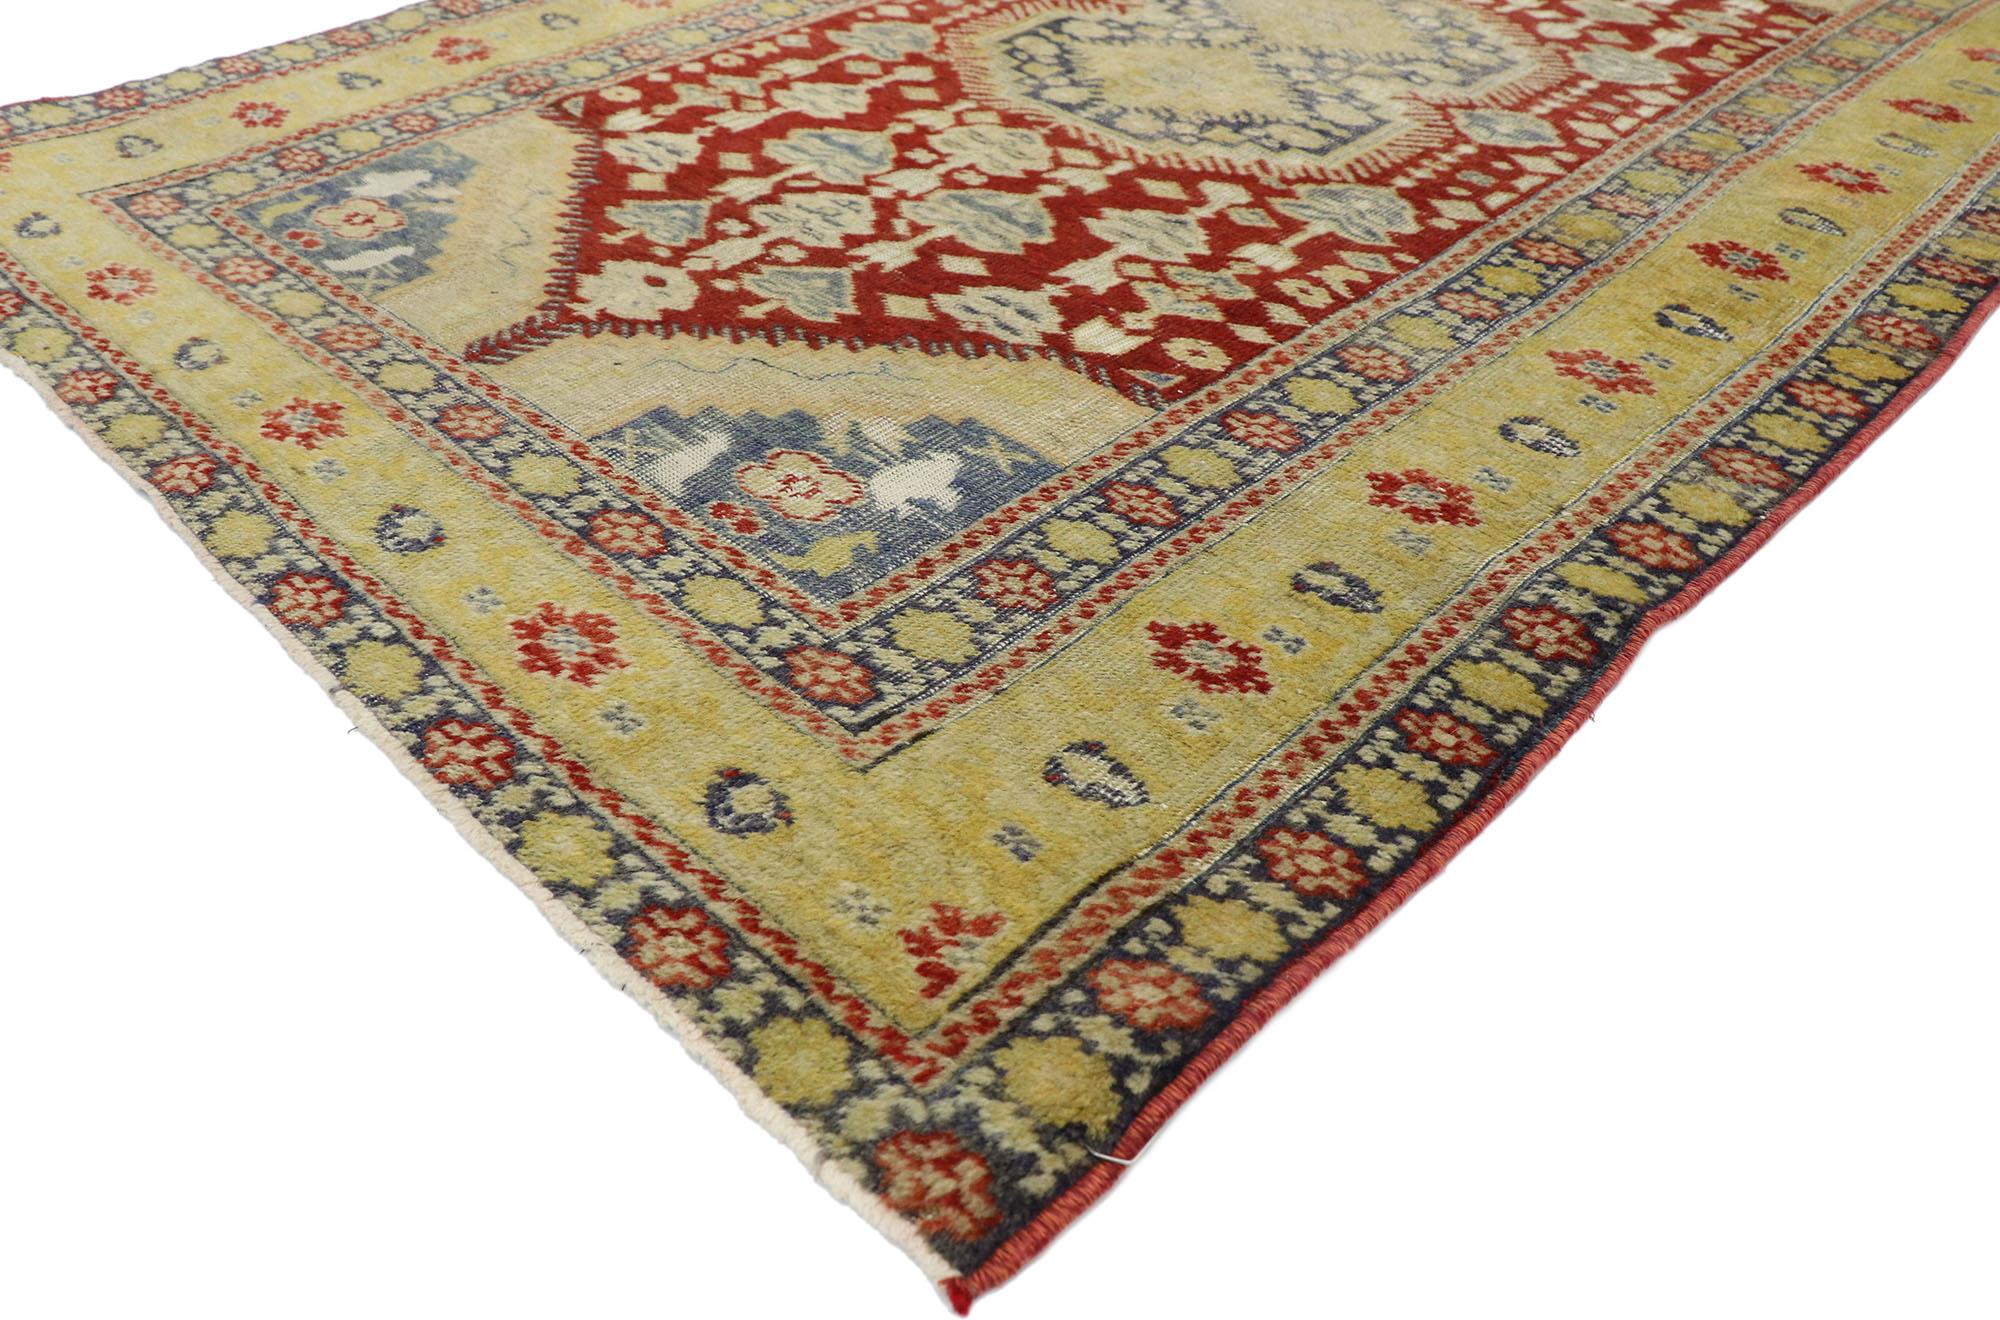 52778, distressed vintage Turkish Oushak rug with Rustic Modern Lodge style. Rusticity meets timeless Anatolian tradition in this hand knotted wool distressed vintage Turkish Oushak rug. It features a double stacked medallion outlined with spiked